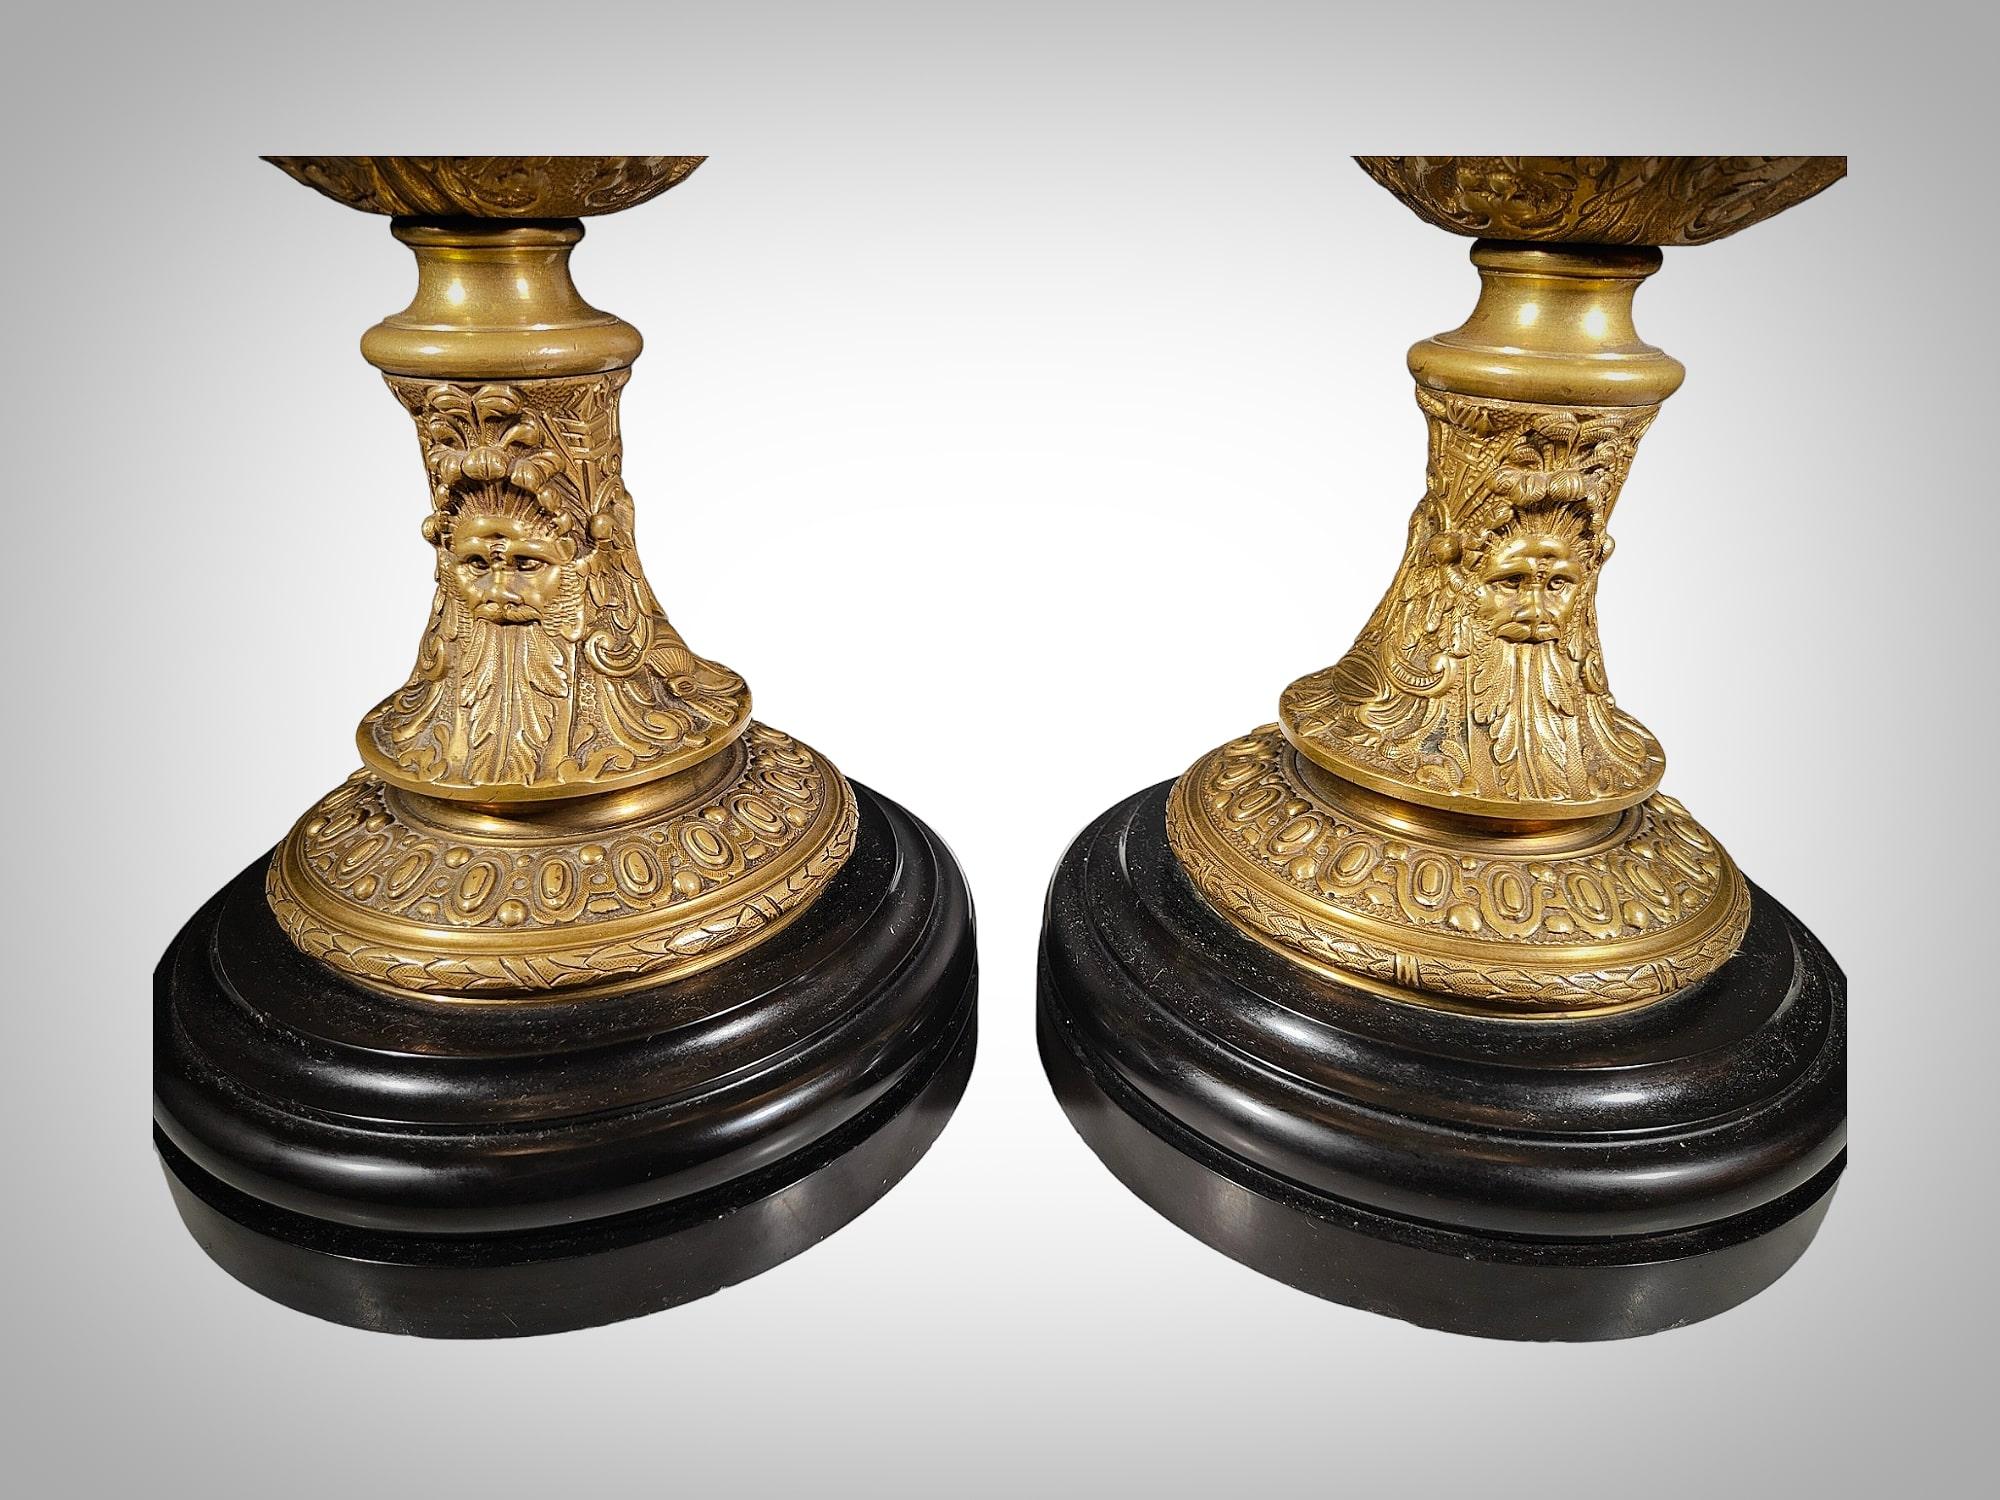 Magnificent Gilded Bronze Vases from the 19th Century For Sale 4